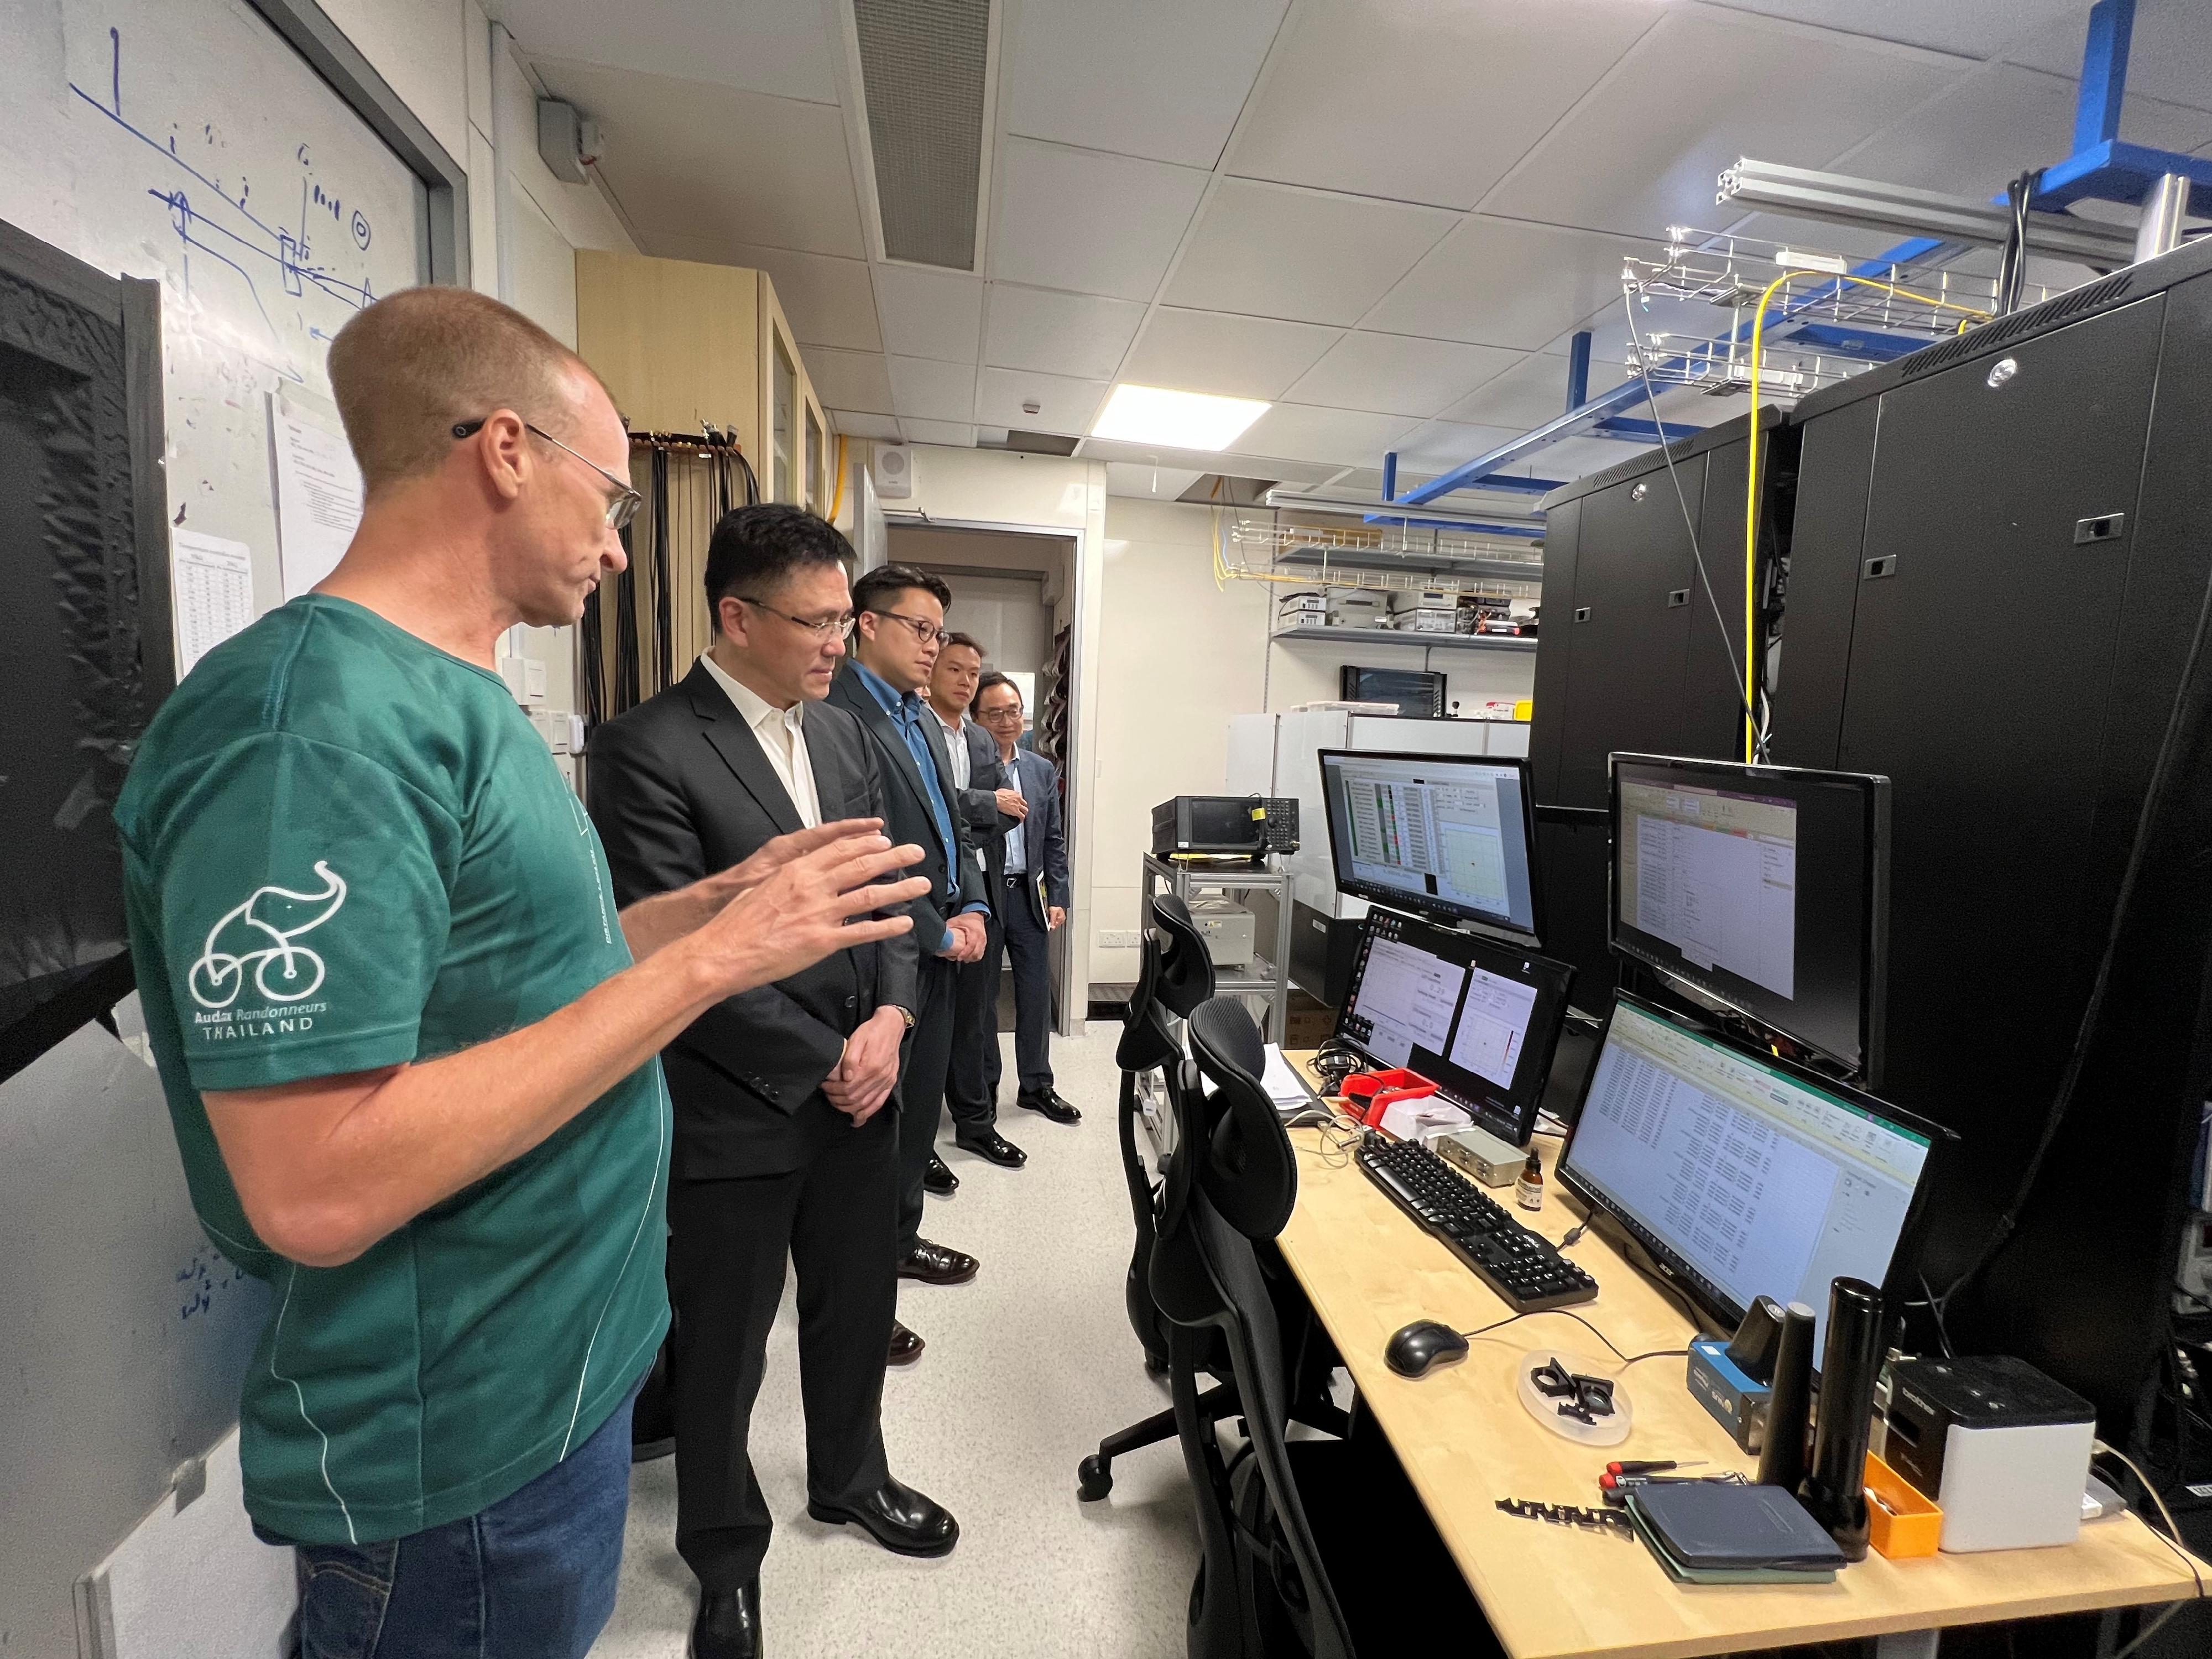 The Secretary for Innovation, Technology and Industry, Professor Sun Dong (second left), tours the laboratories of the Centre for Quantum Technologies today (May 22) in Singapore.